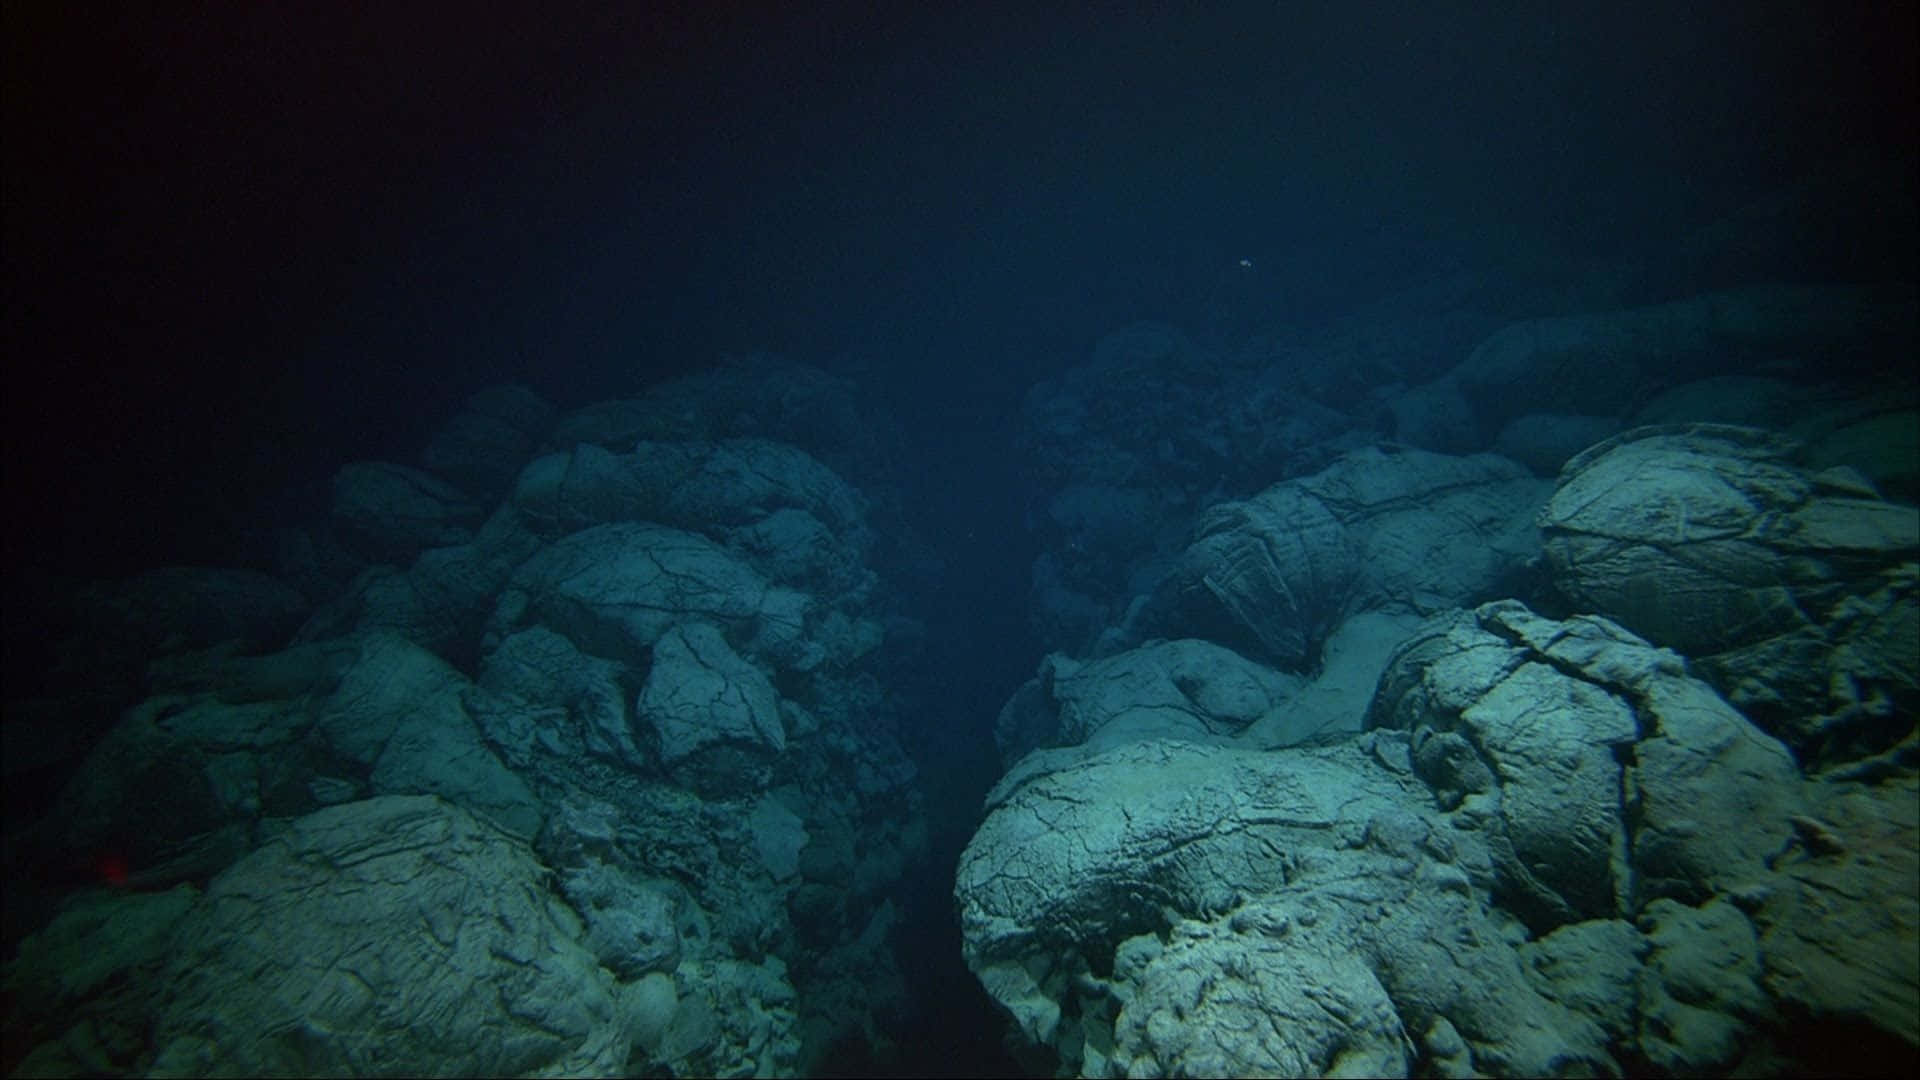 A View Of A Large Rock Formation In The Ocean